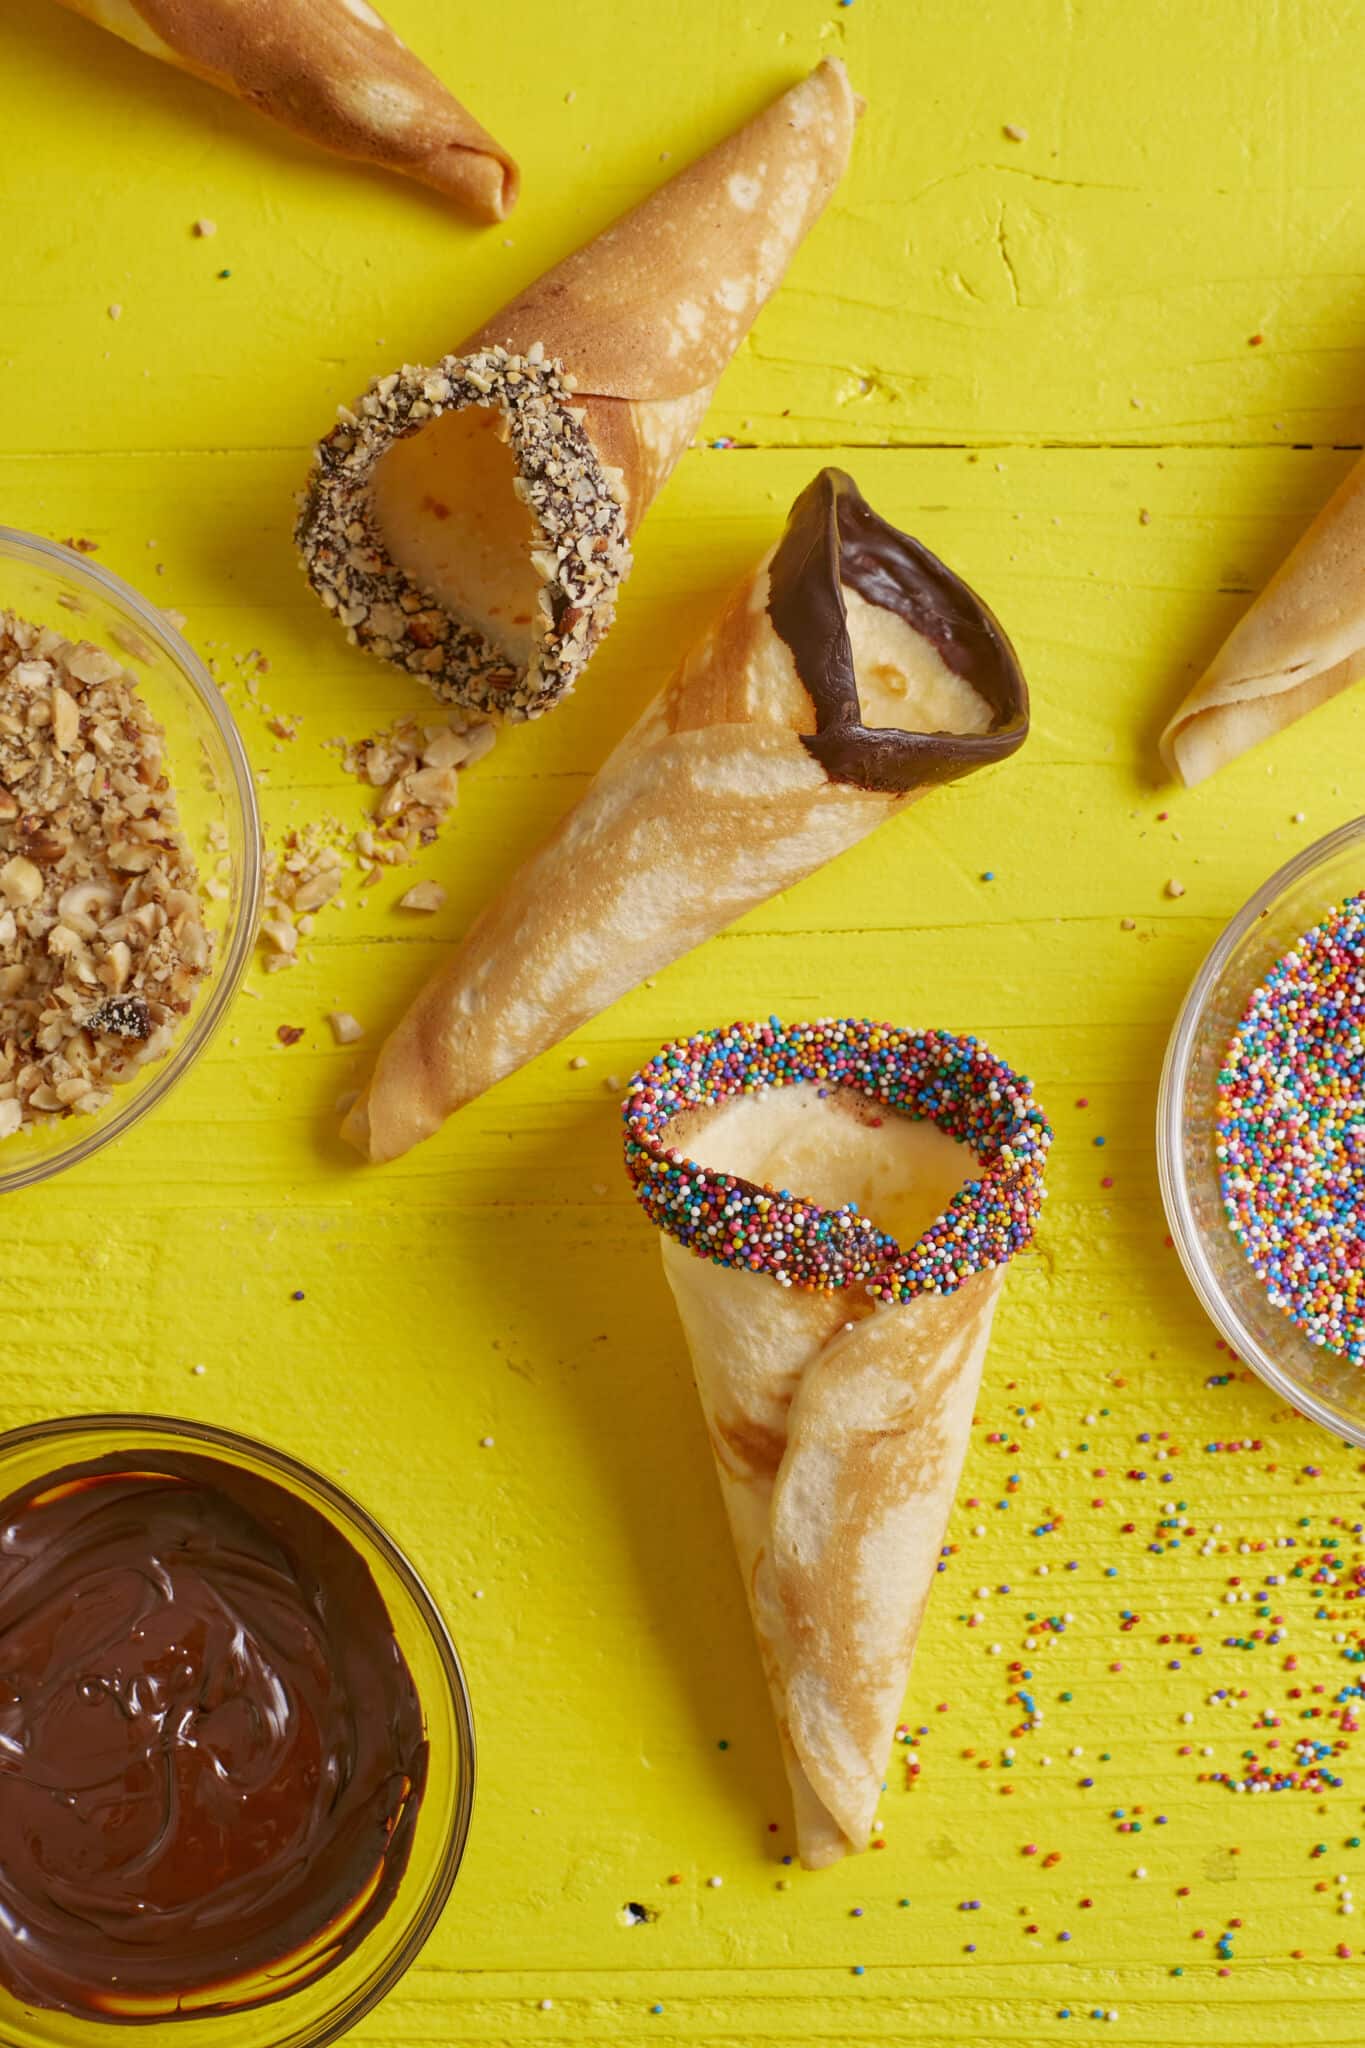 Decorate cones with melted chocolate, sprinkles, nuts or other mix-ins of your choice.